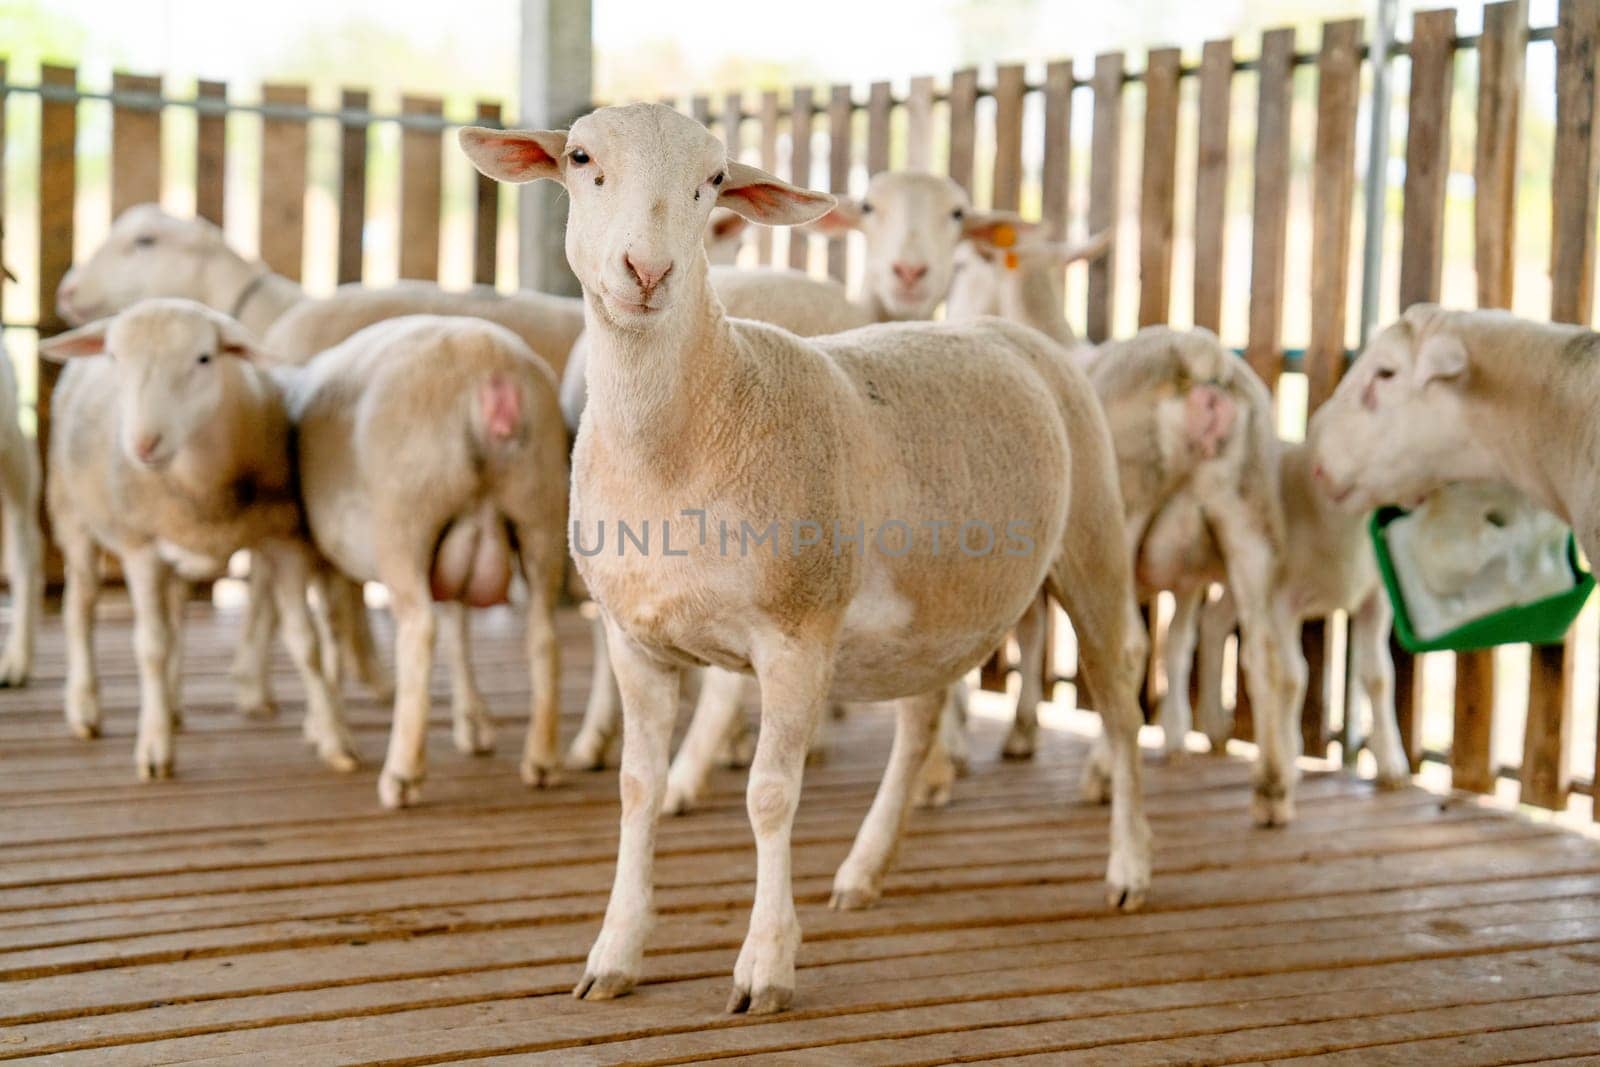 One sheep look at camera with wonder face and stand in front of other sheep in stable with day light. by nrradmin